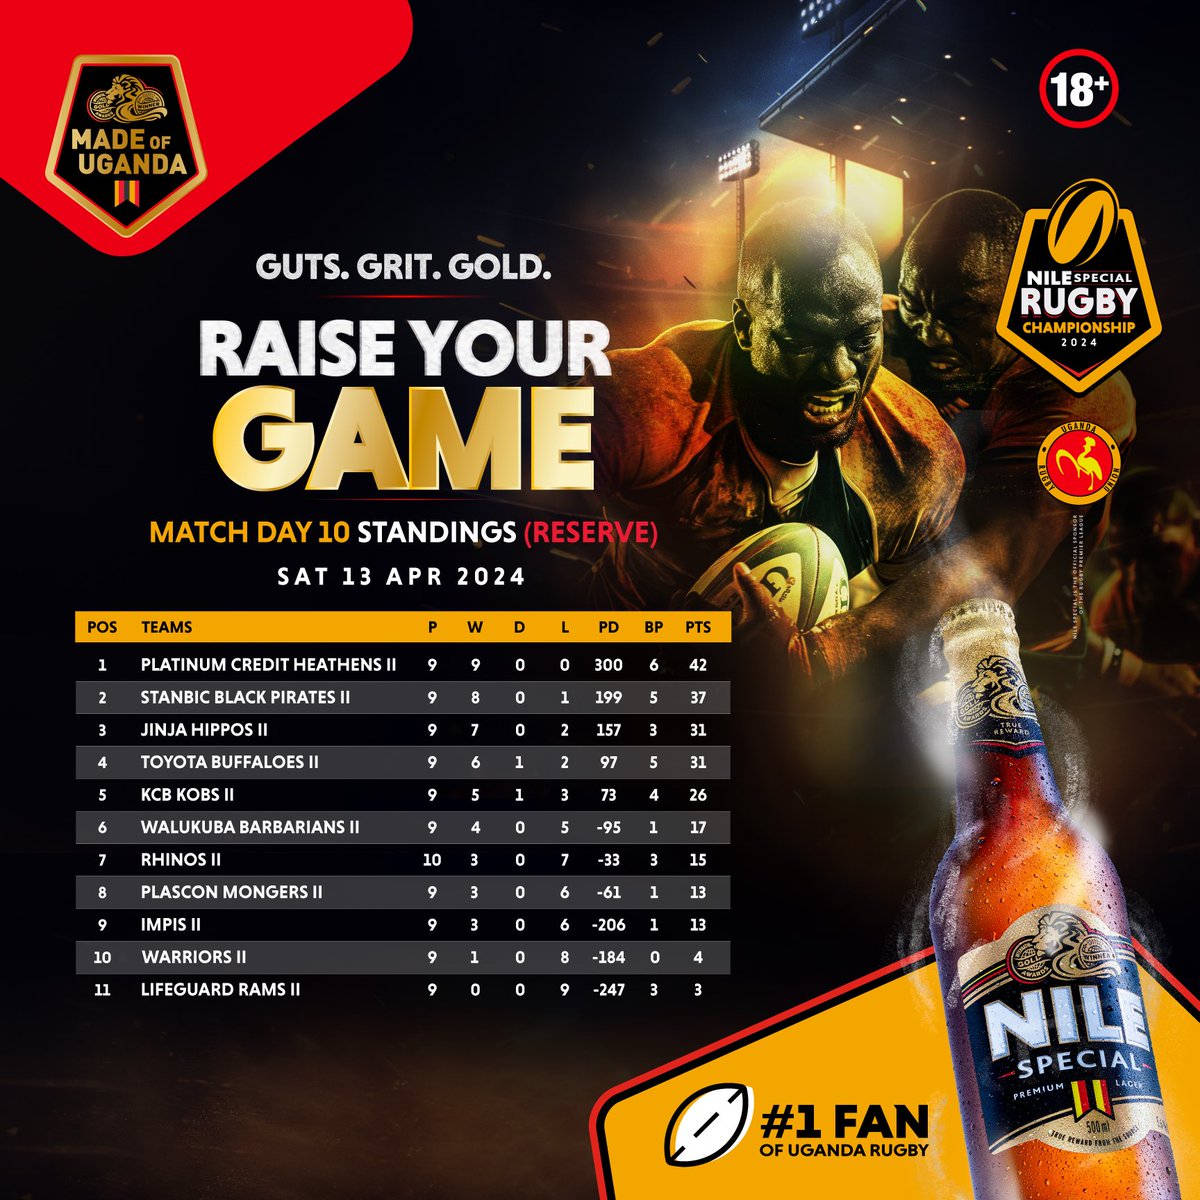 Game day 10 table standings for both the Men's & Women's Nile Special rugby premiership and the Reserve Nile Special rugby championship. 🏉💪🏾 #RaiseYourGame #GutsGritGold #UnmatchedinGold #NSRC2024 #RNSRC2024